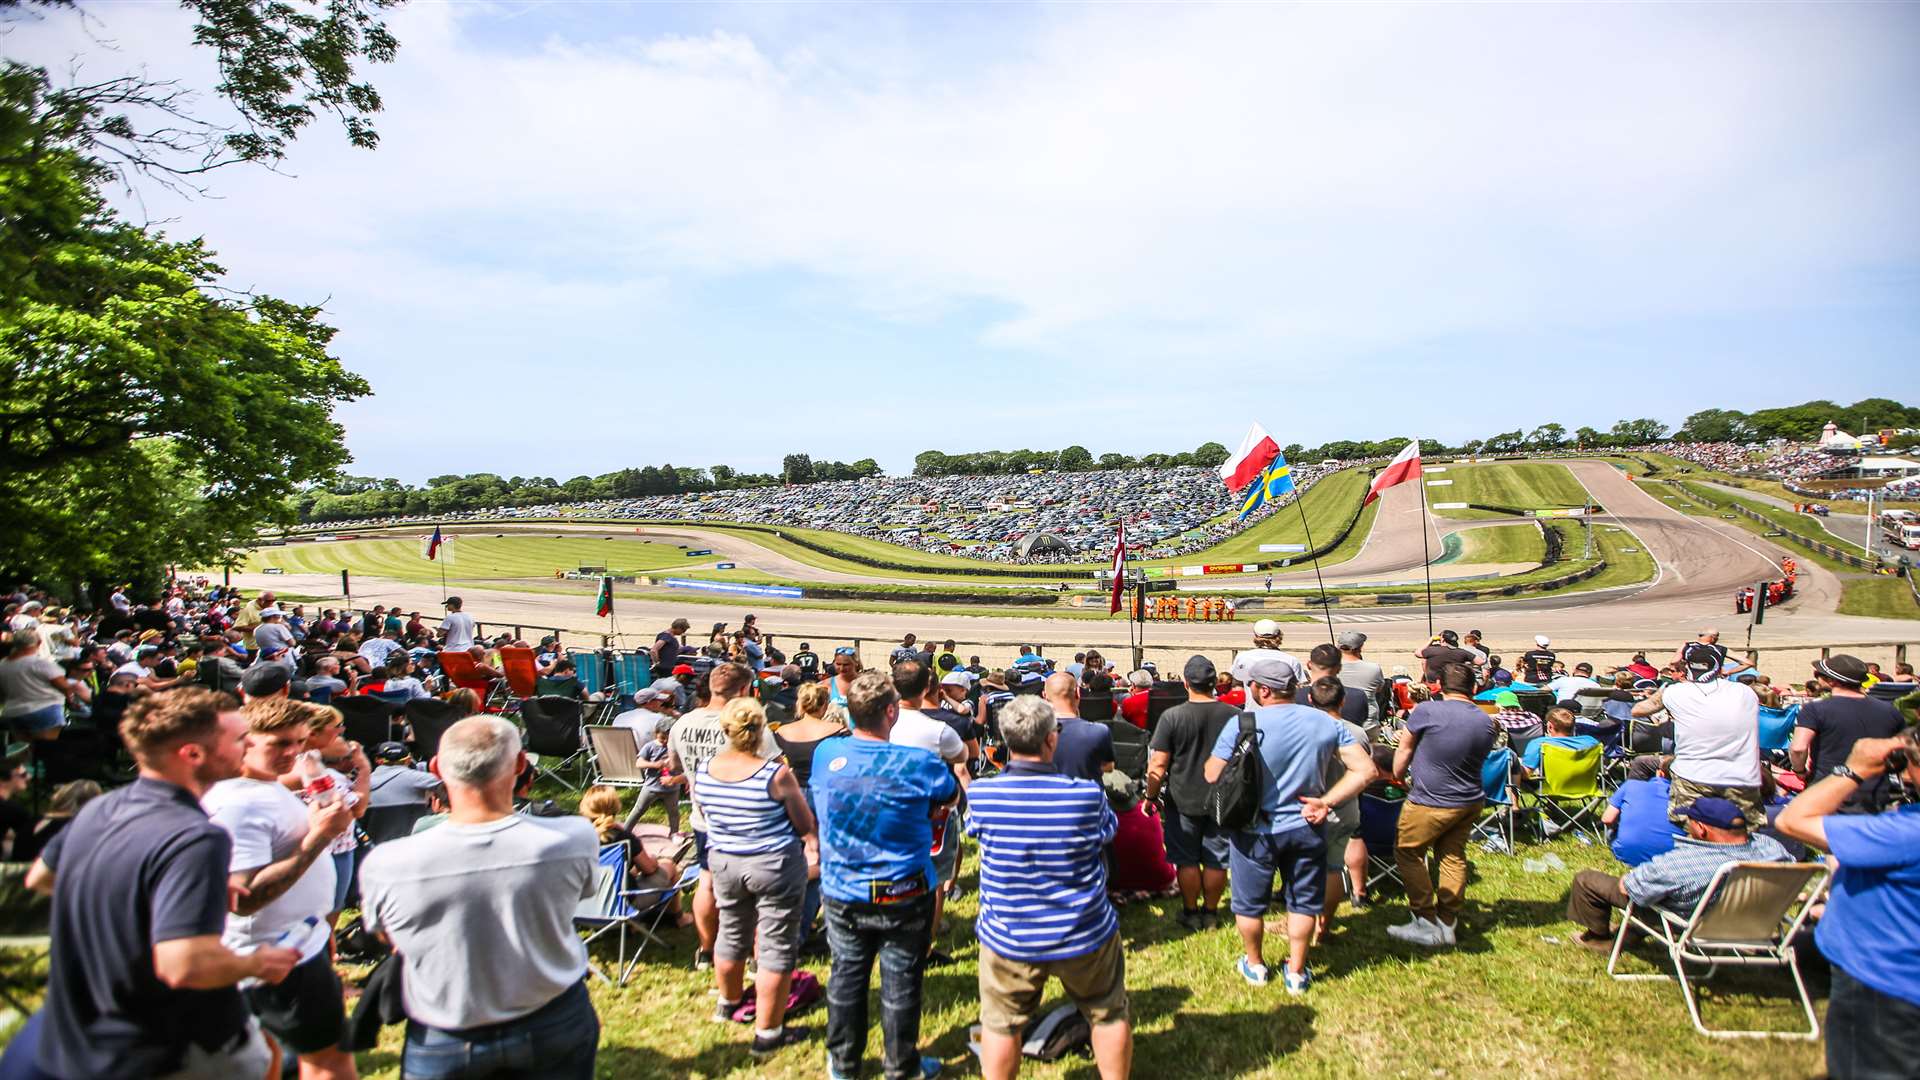 A record crowd of 25,000 people enjoyed the action. Picture: FIAWorldRallycross.com